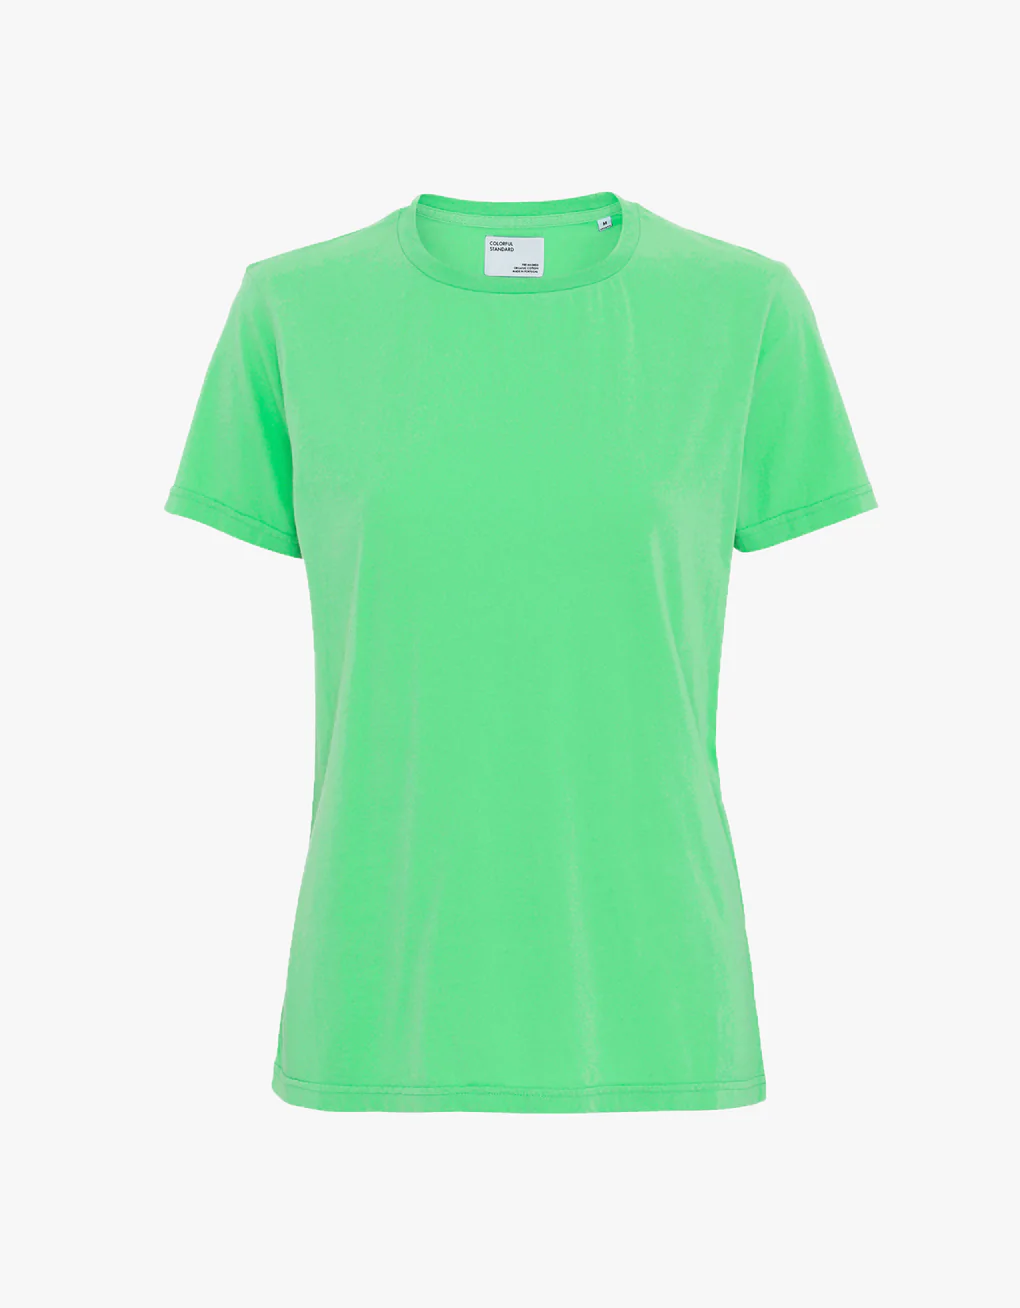 Colorful_S_woman_light_org_Tee_spring_green